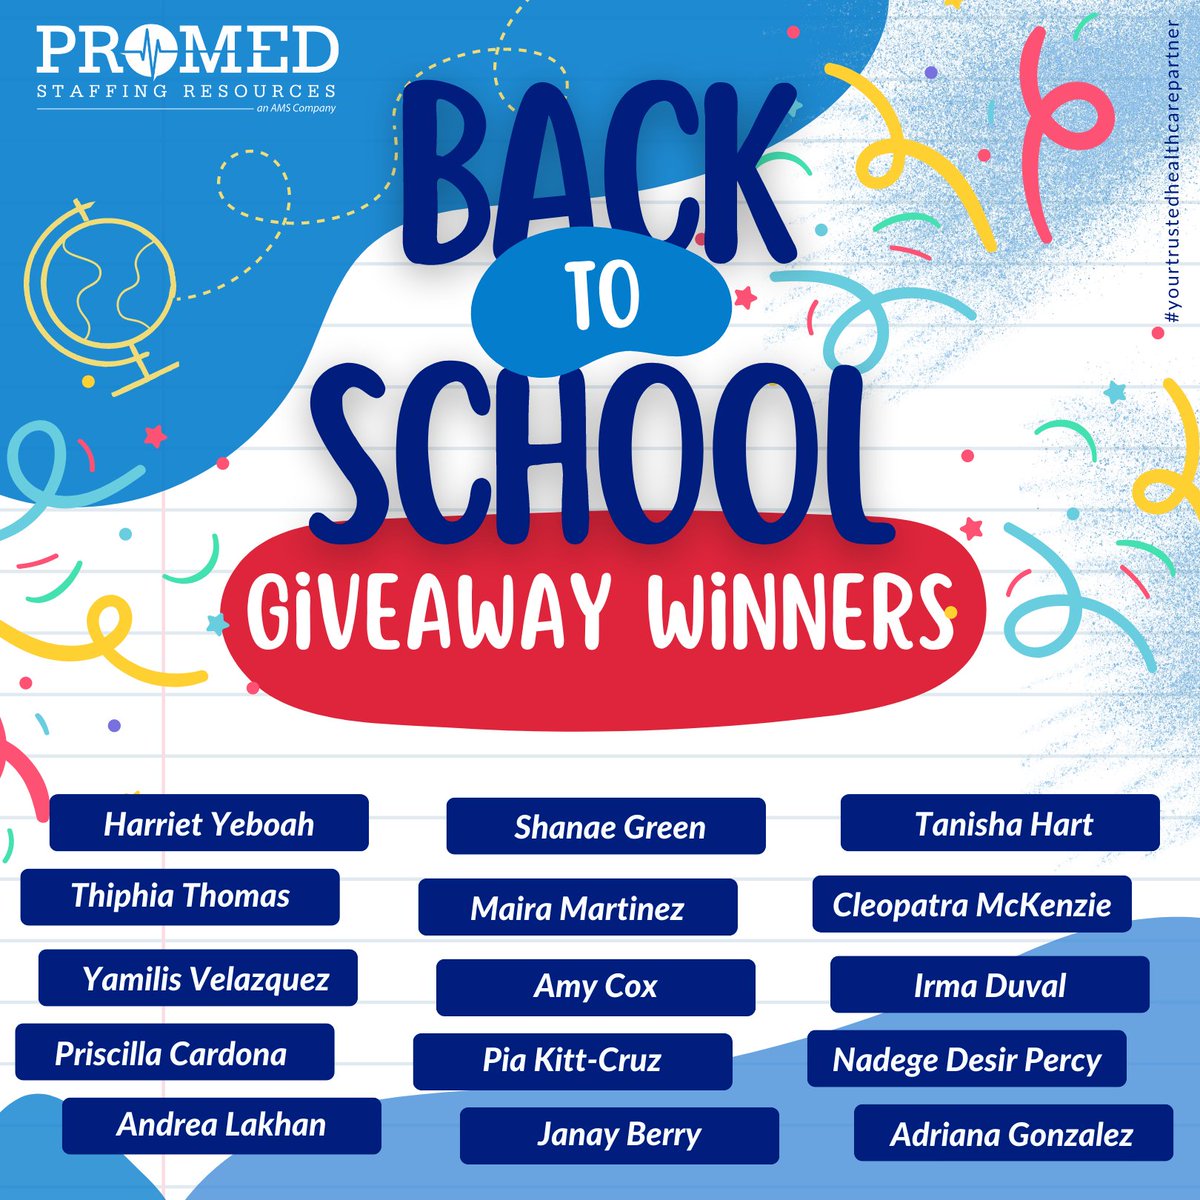 A heartfelt thank you to everyone who participated in our 2023 “#BacktoSchool” Supply #Giveaway. At ProMed Staffing Resources, we believe in the power of education. Thank you for joining us on this #mission
 
#backtoschoolgiveaway #accesstoall  #giveaway #schoolyear2324 #promedsr